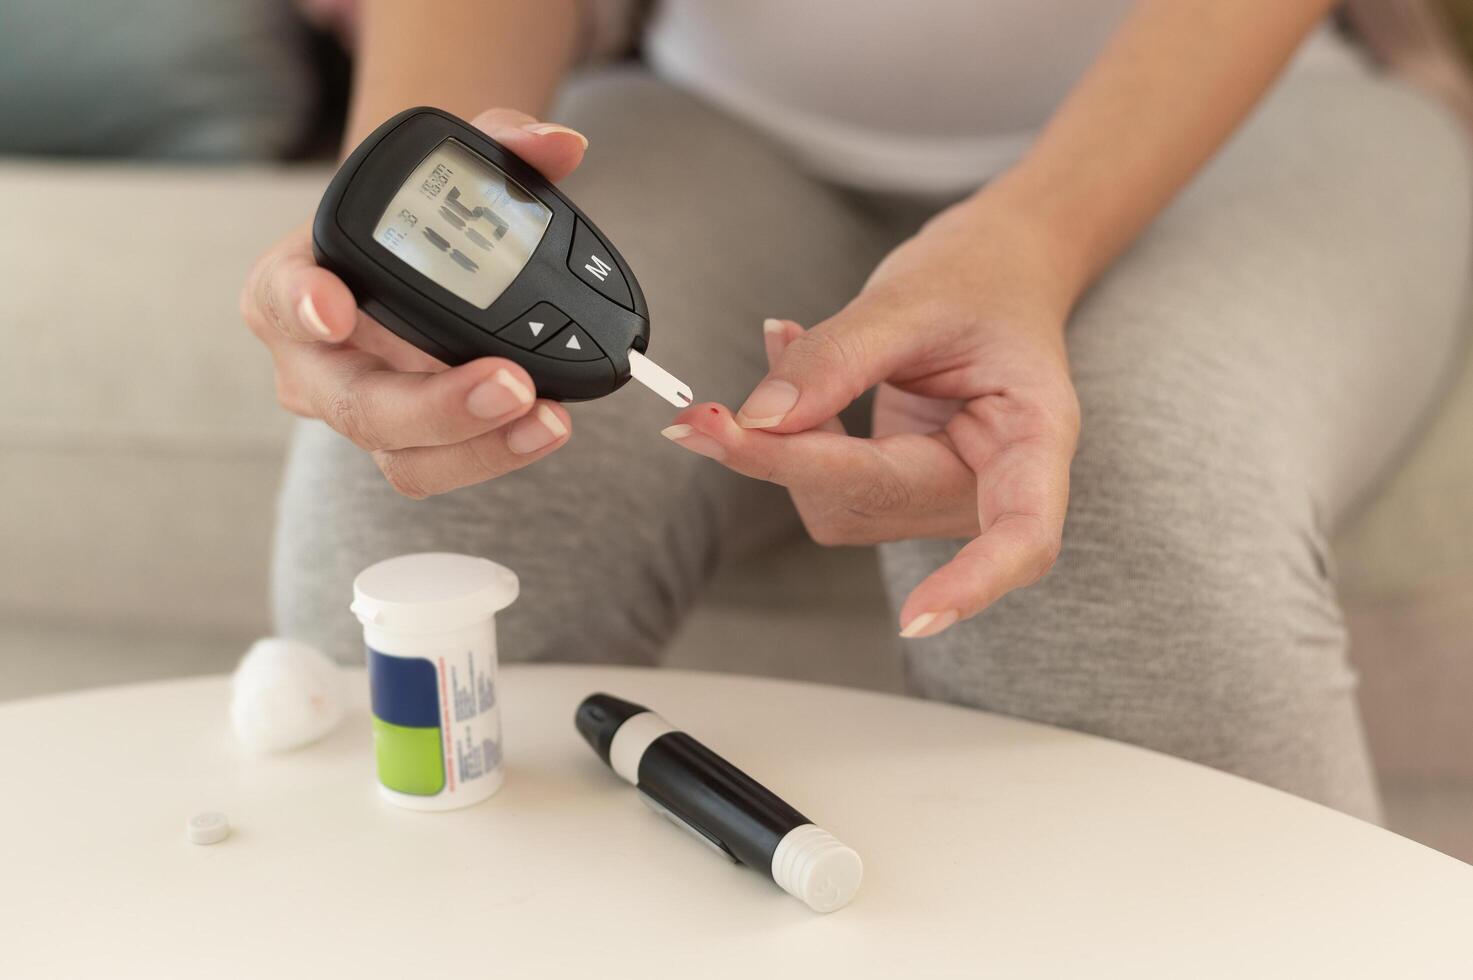 Close up of woman checking blood sugar level by using Digital Glucose meter, health care, medicine, diabetes, glycemia concept photo